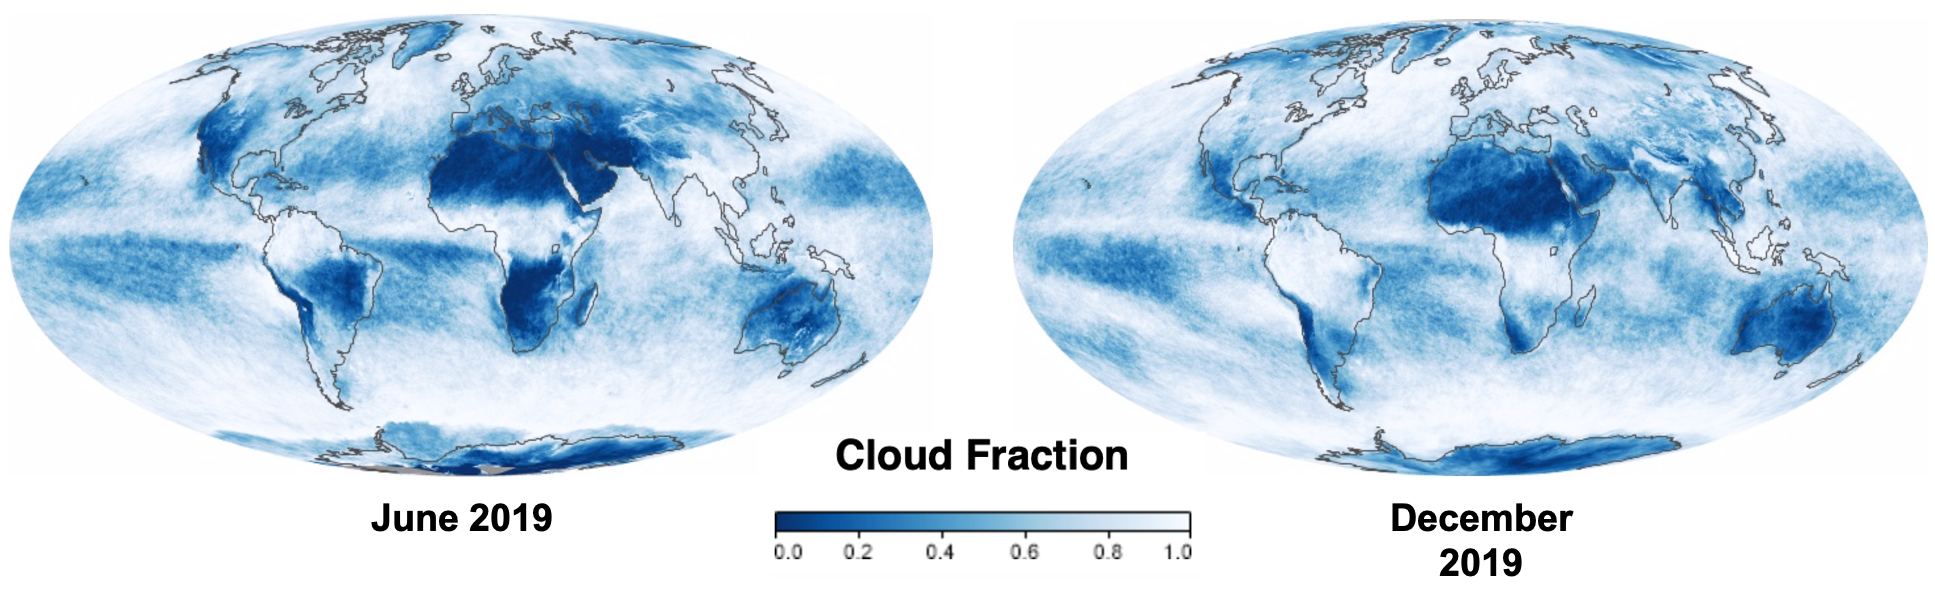 Cloud fraction over the year around the globe